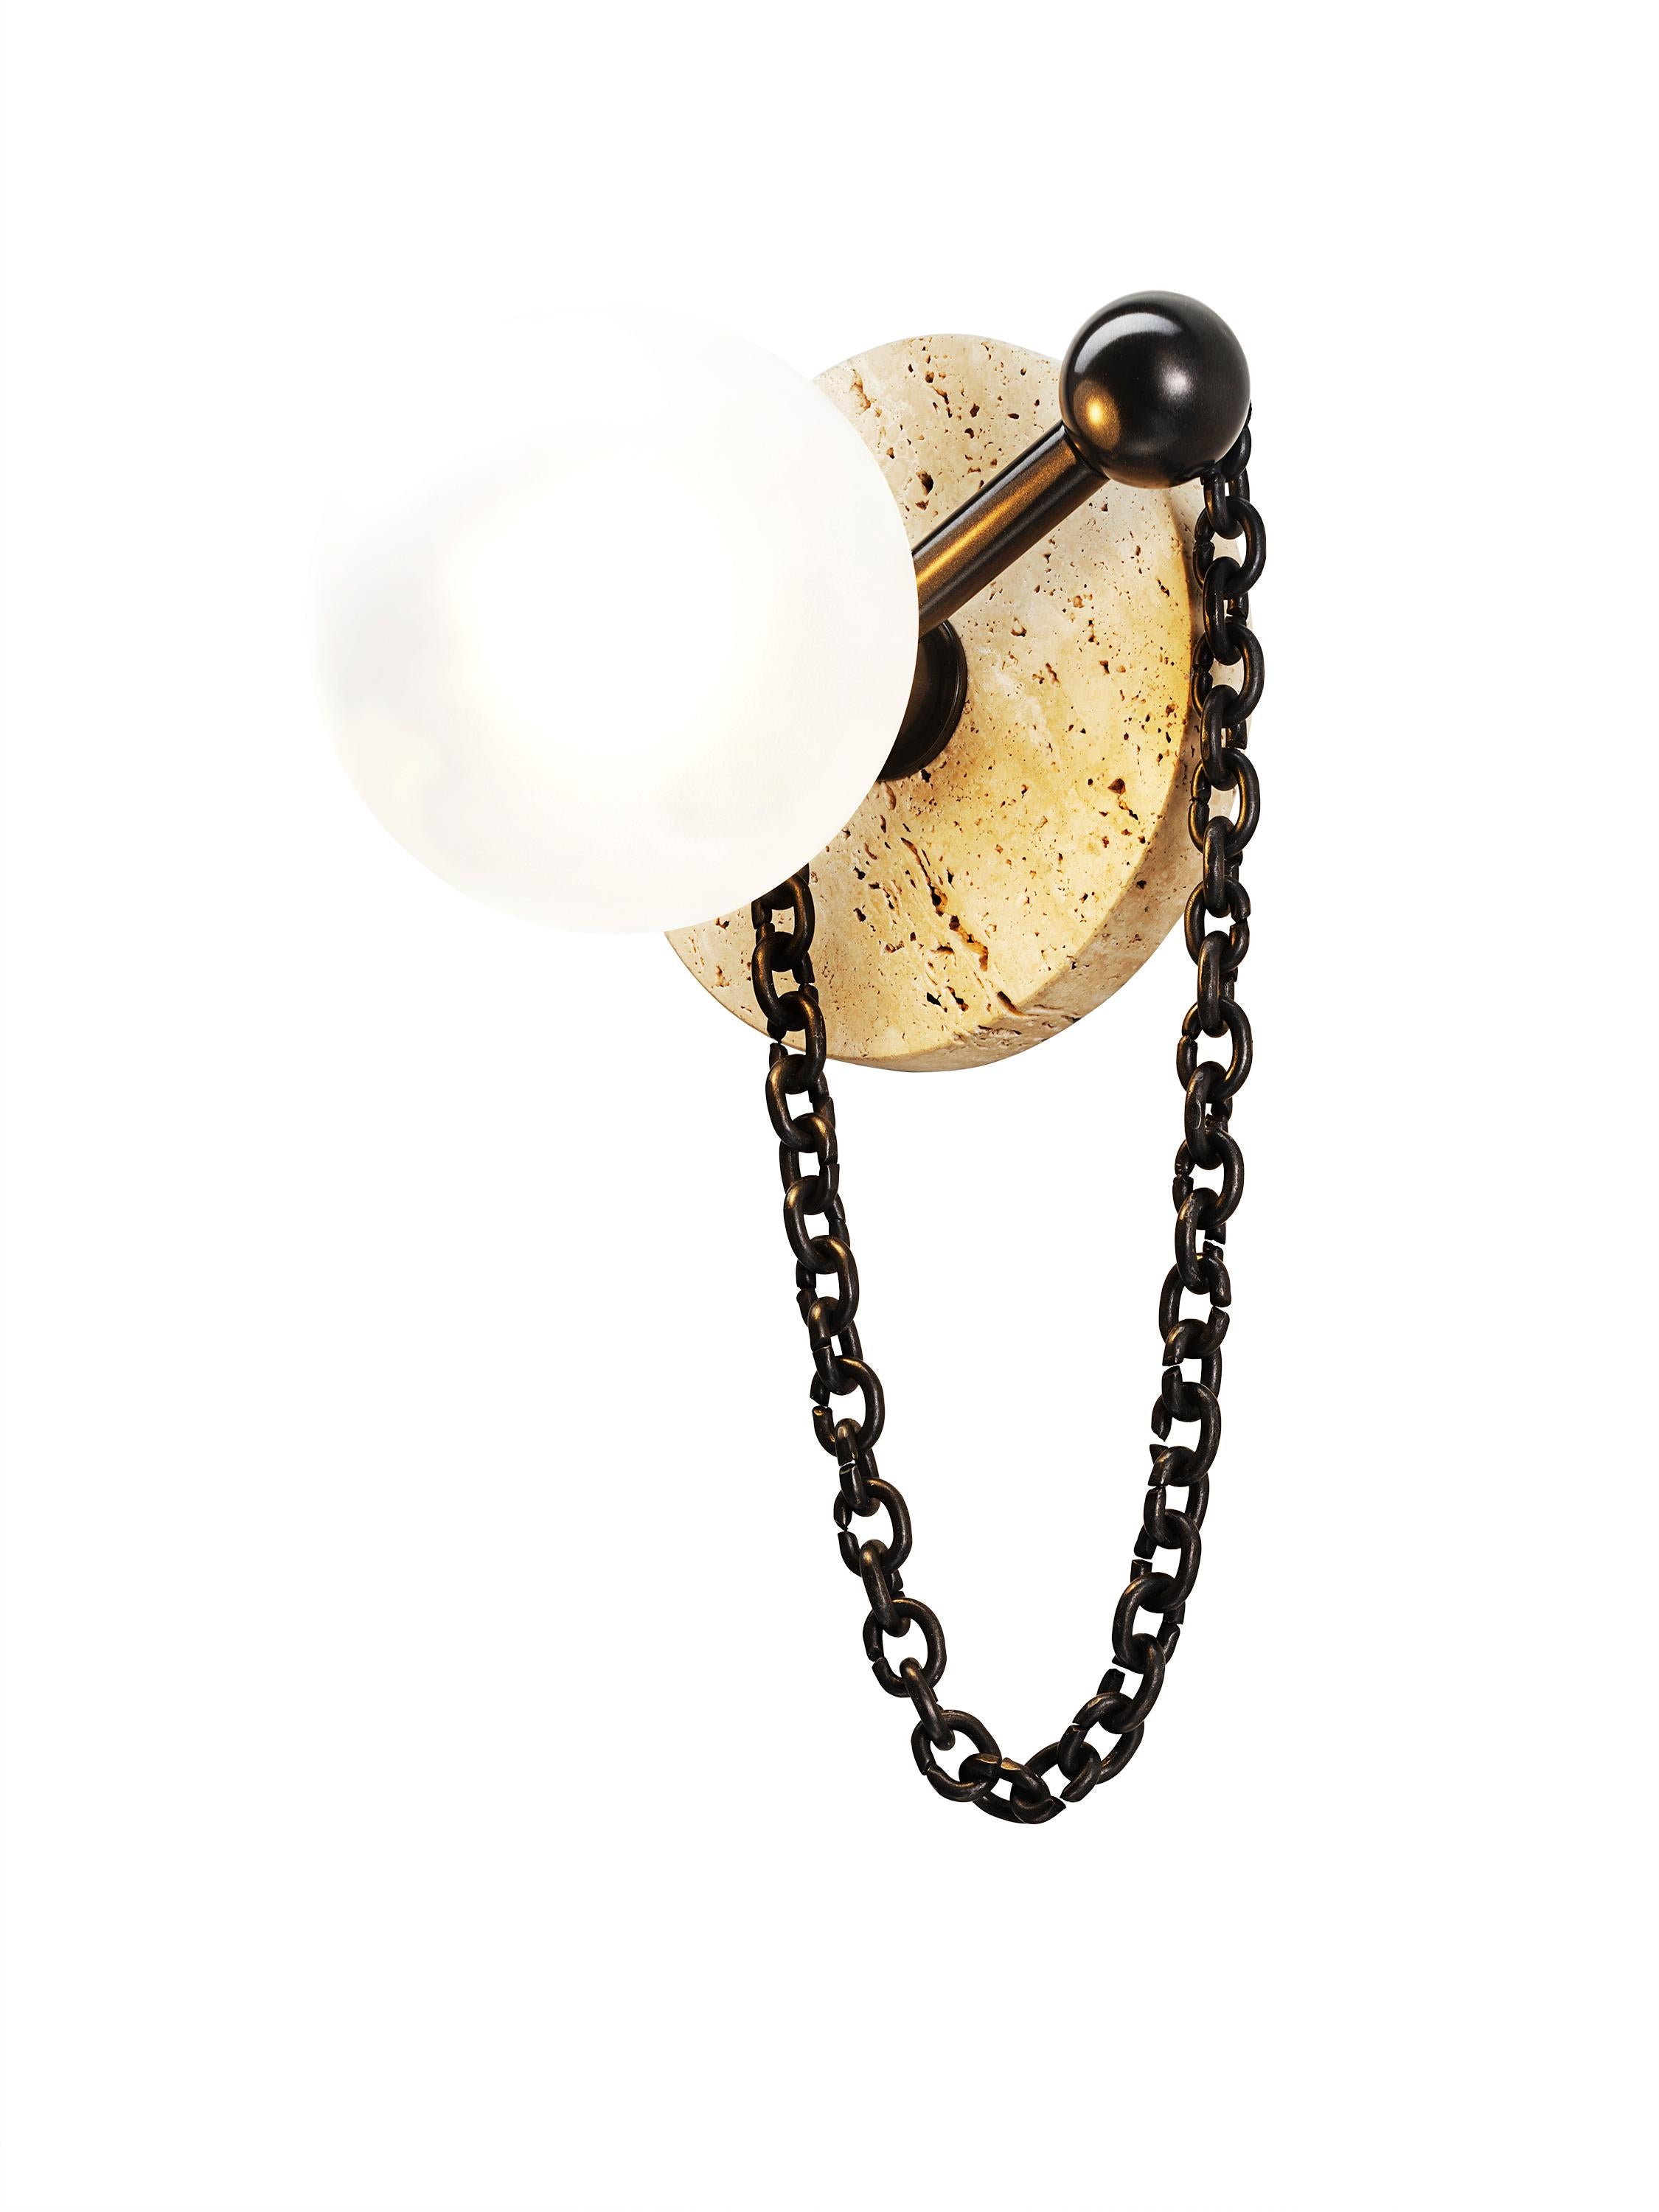 ALLA WALL SCONCE

Featuring a travertine backplate and delicate chain inspired by Christian Dior’s luxurious pearl earrings, the Alla Wall Sconce delivers a harmonious blend of simplicity and sophistication, brilliantly complementing any wall it